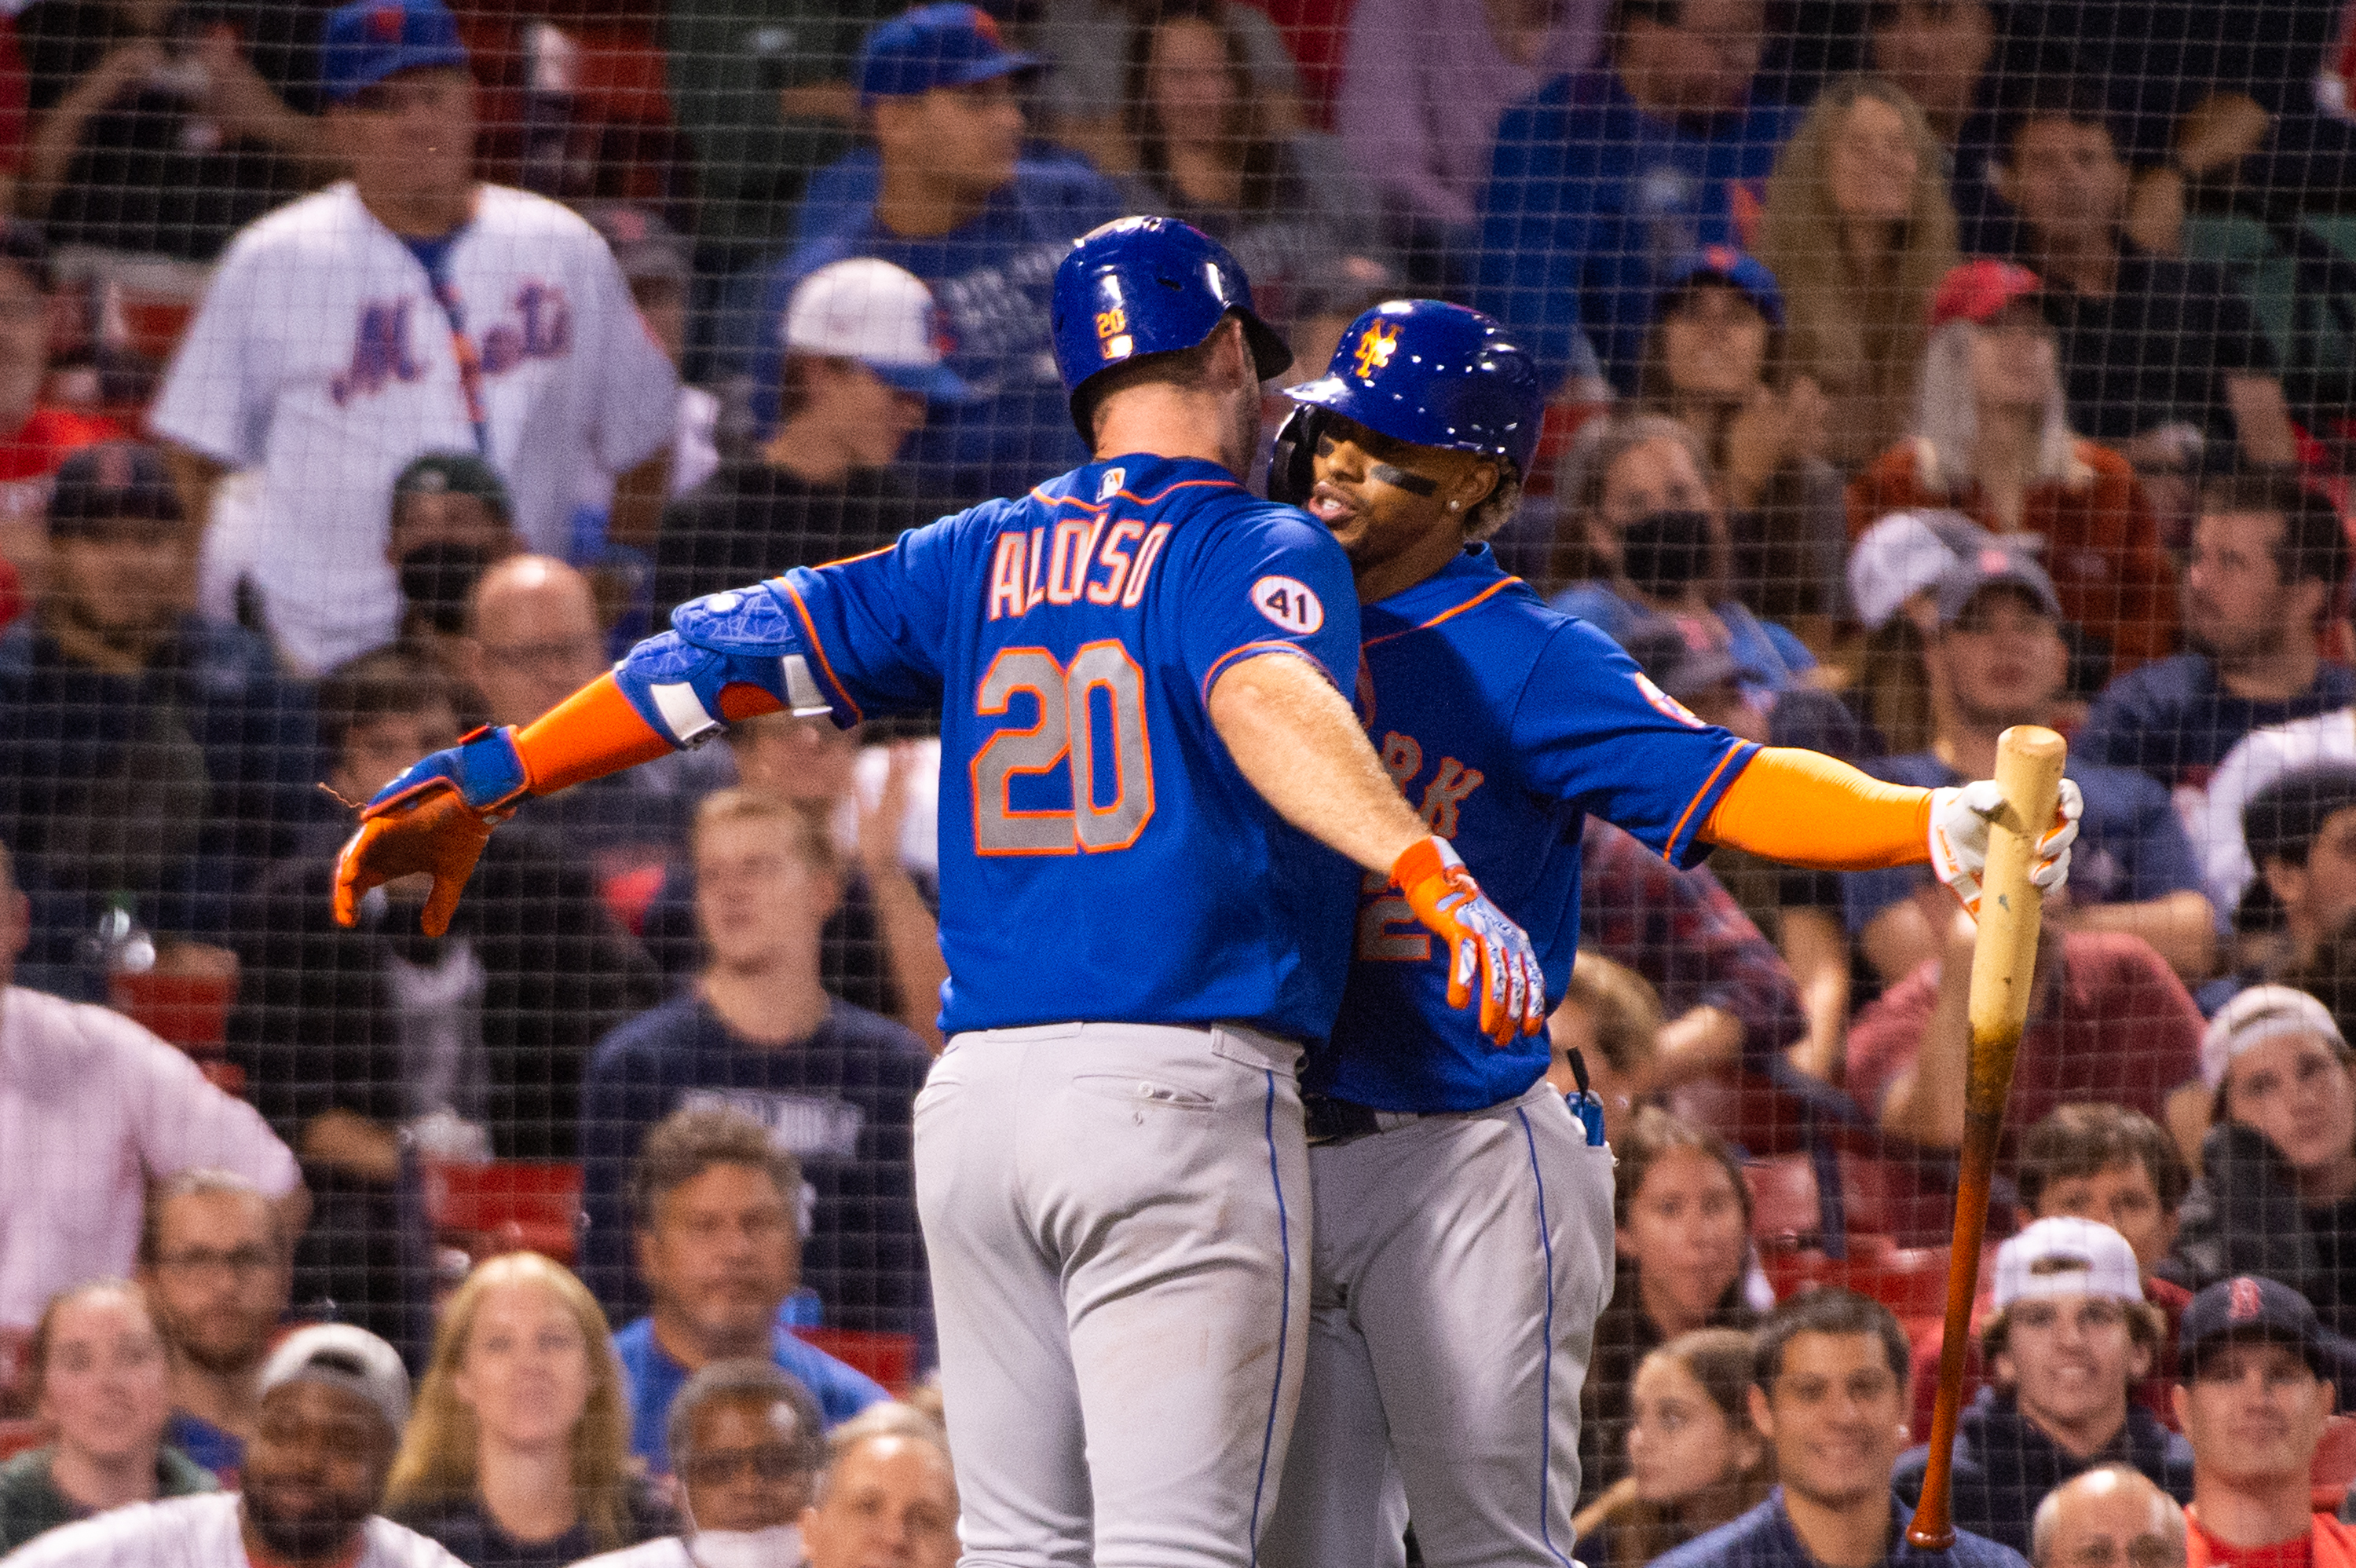 Pete Alonso provides Mets' best chance to break MVP drought